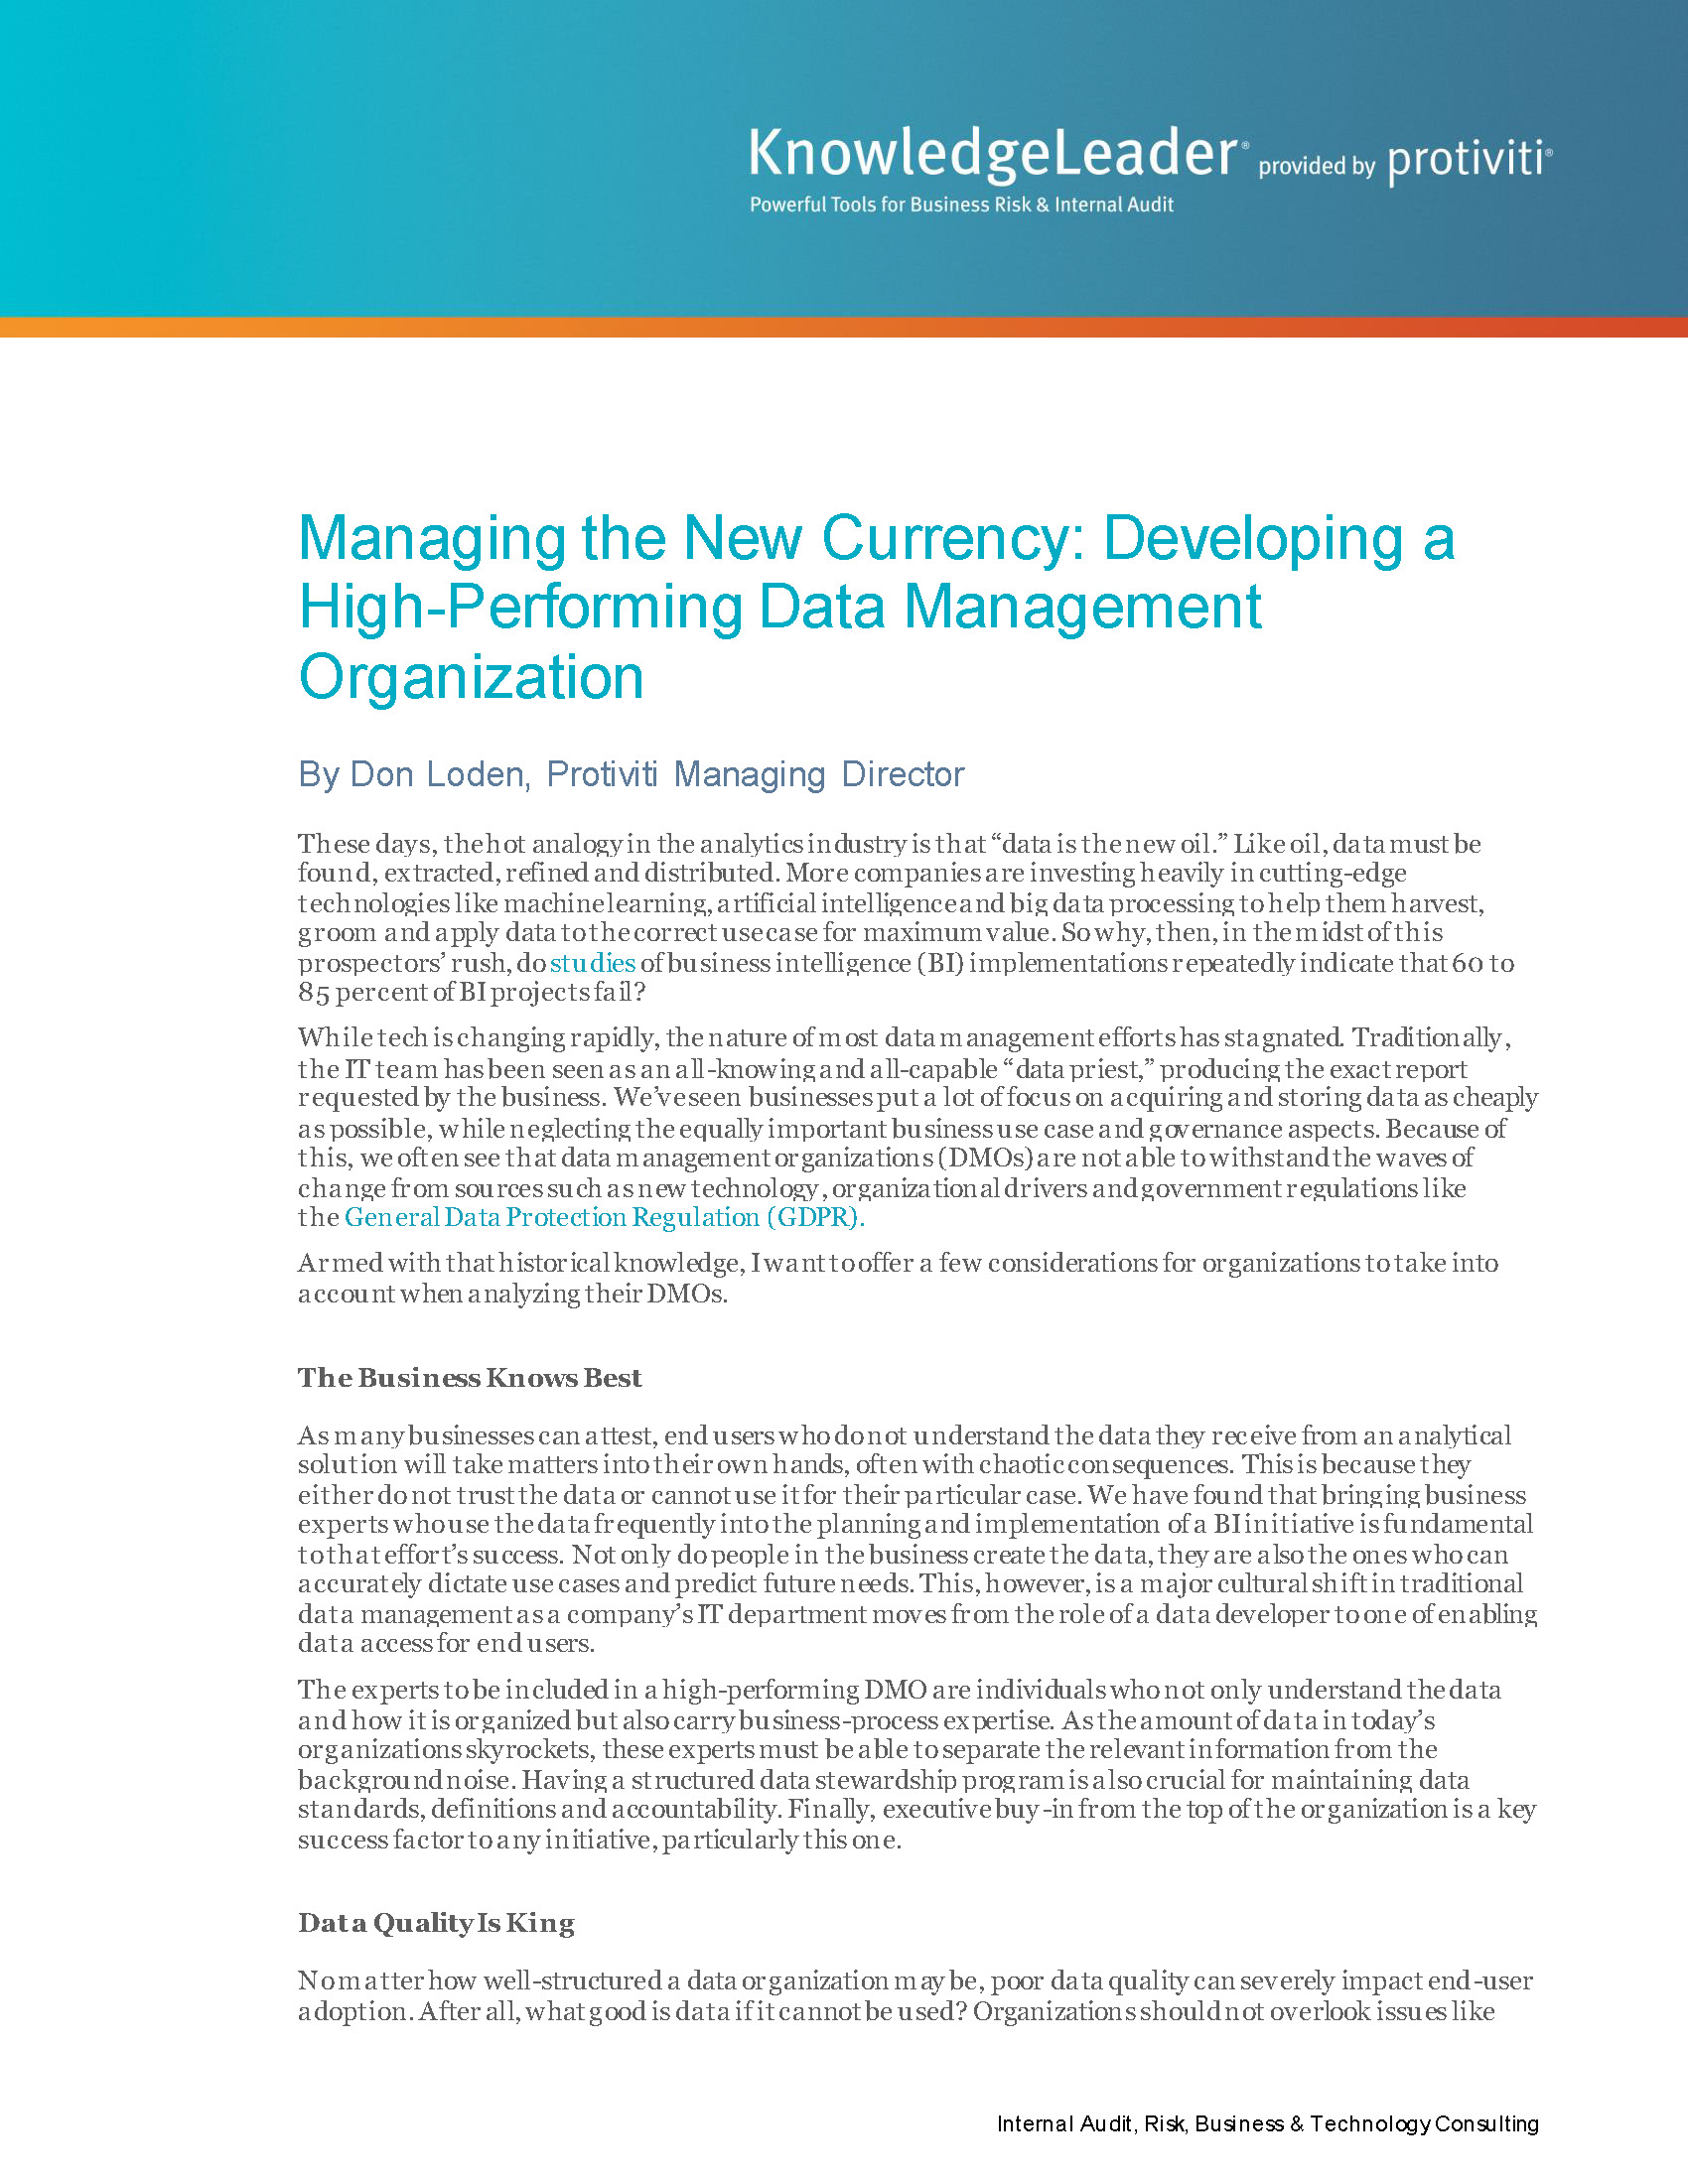 Screenshot of the first page of Managing the New Currency Developing a High-Performing Data Management Organization